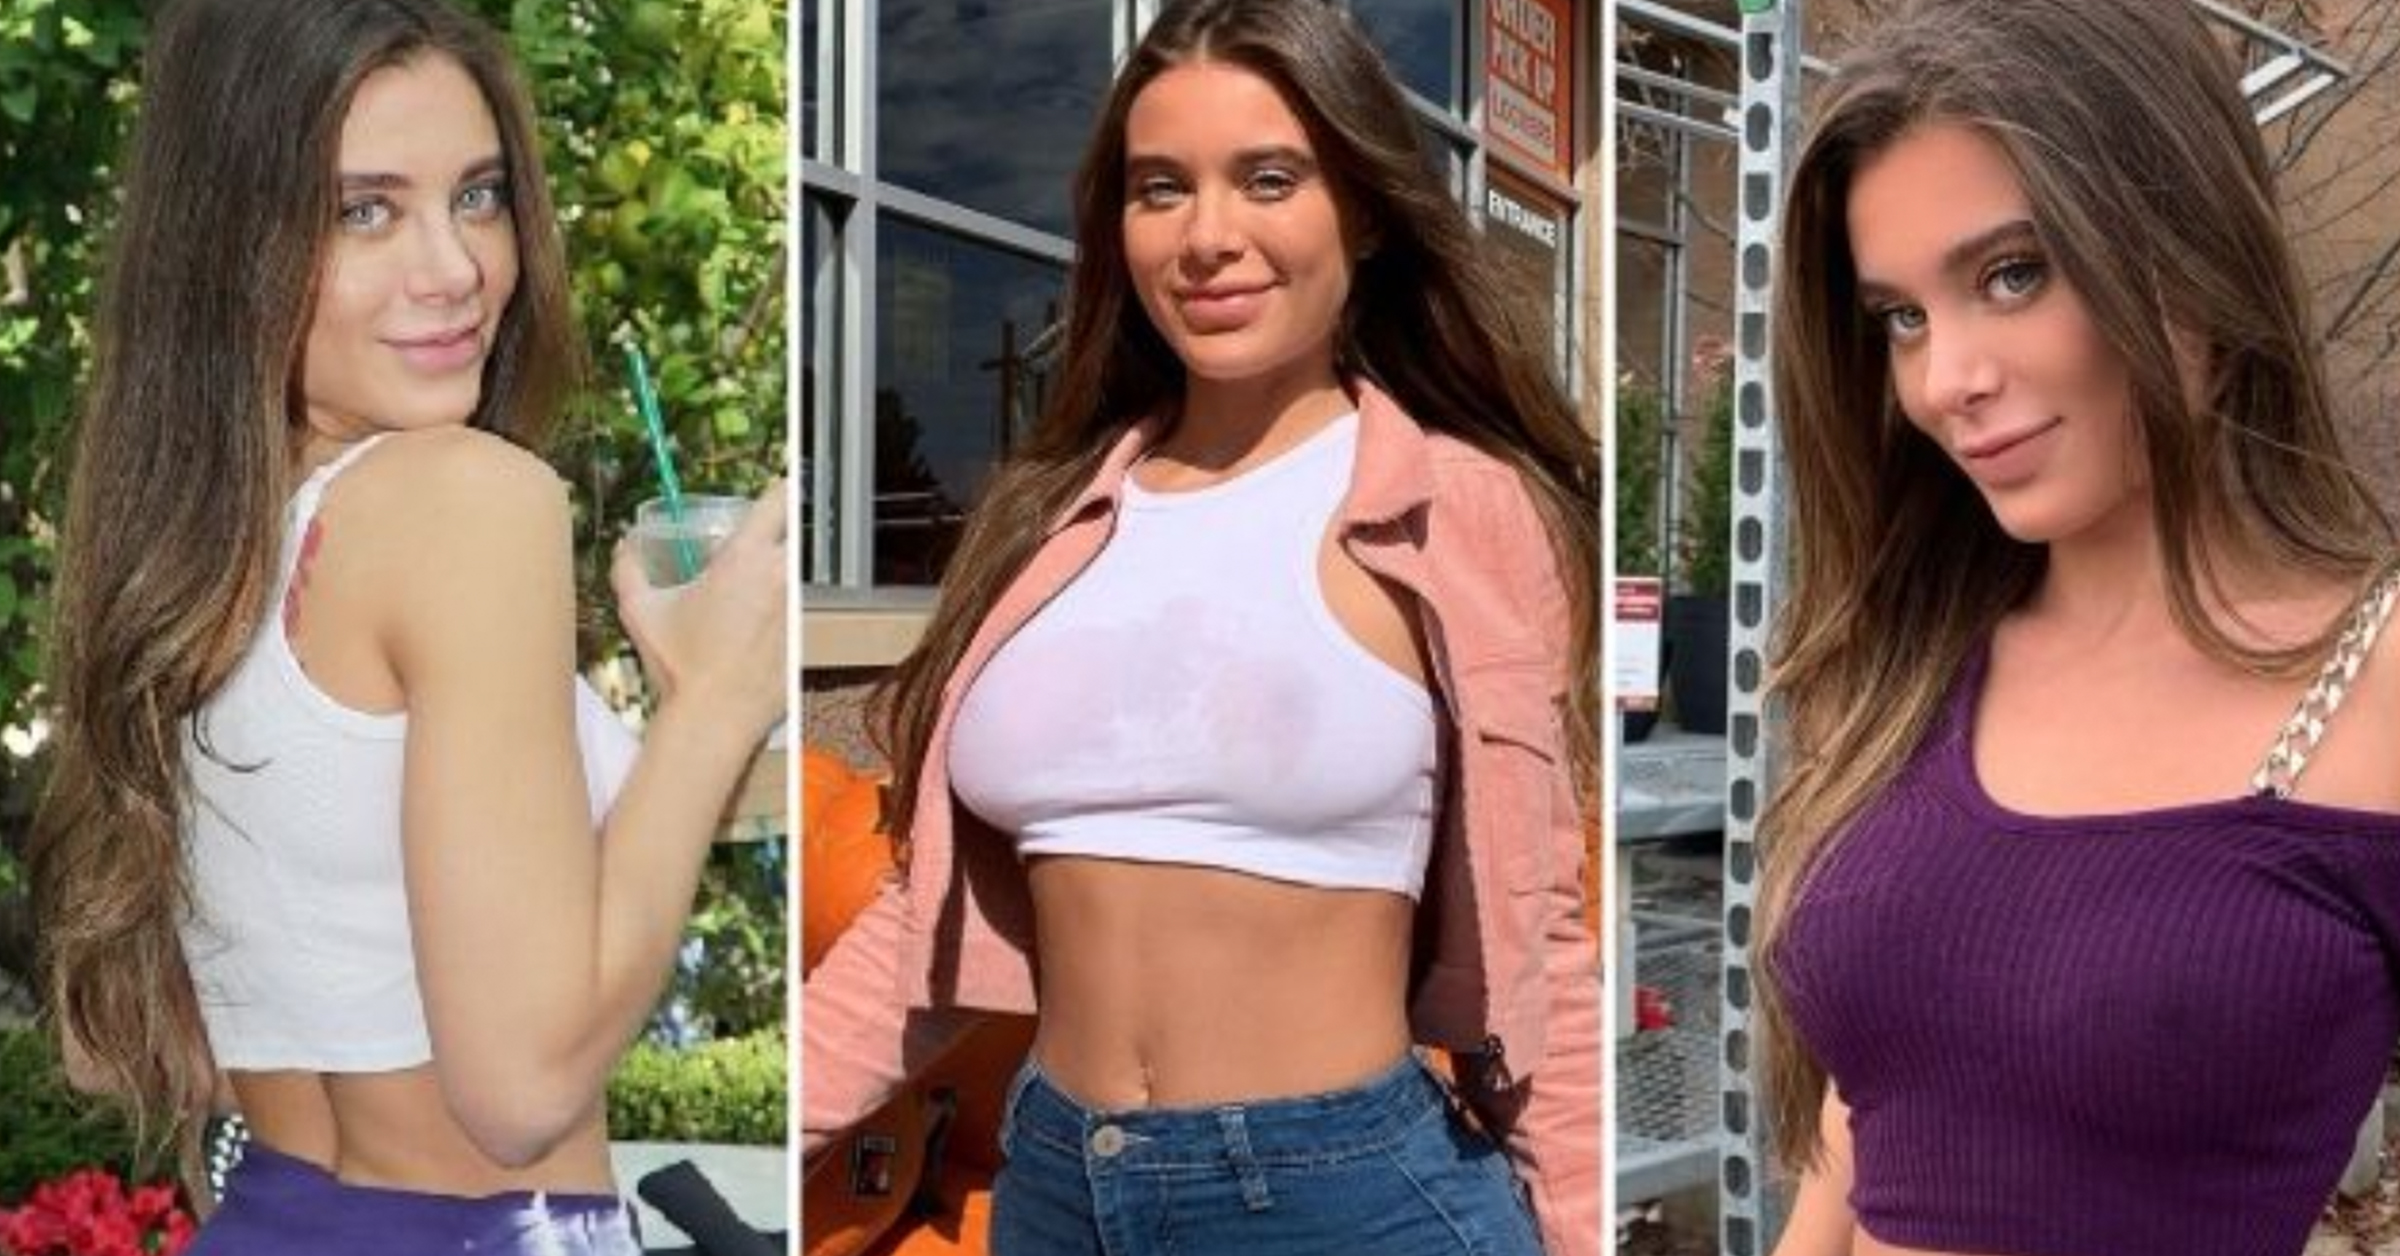 Porn star Lana Rhoades has claimed that she received direct messages from a...